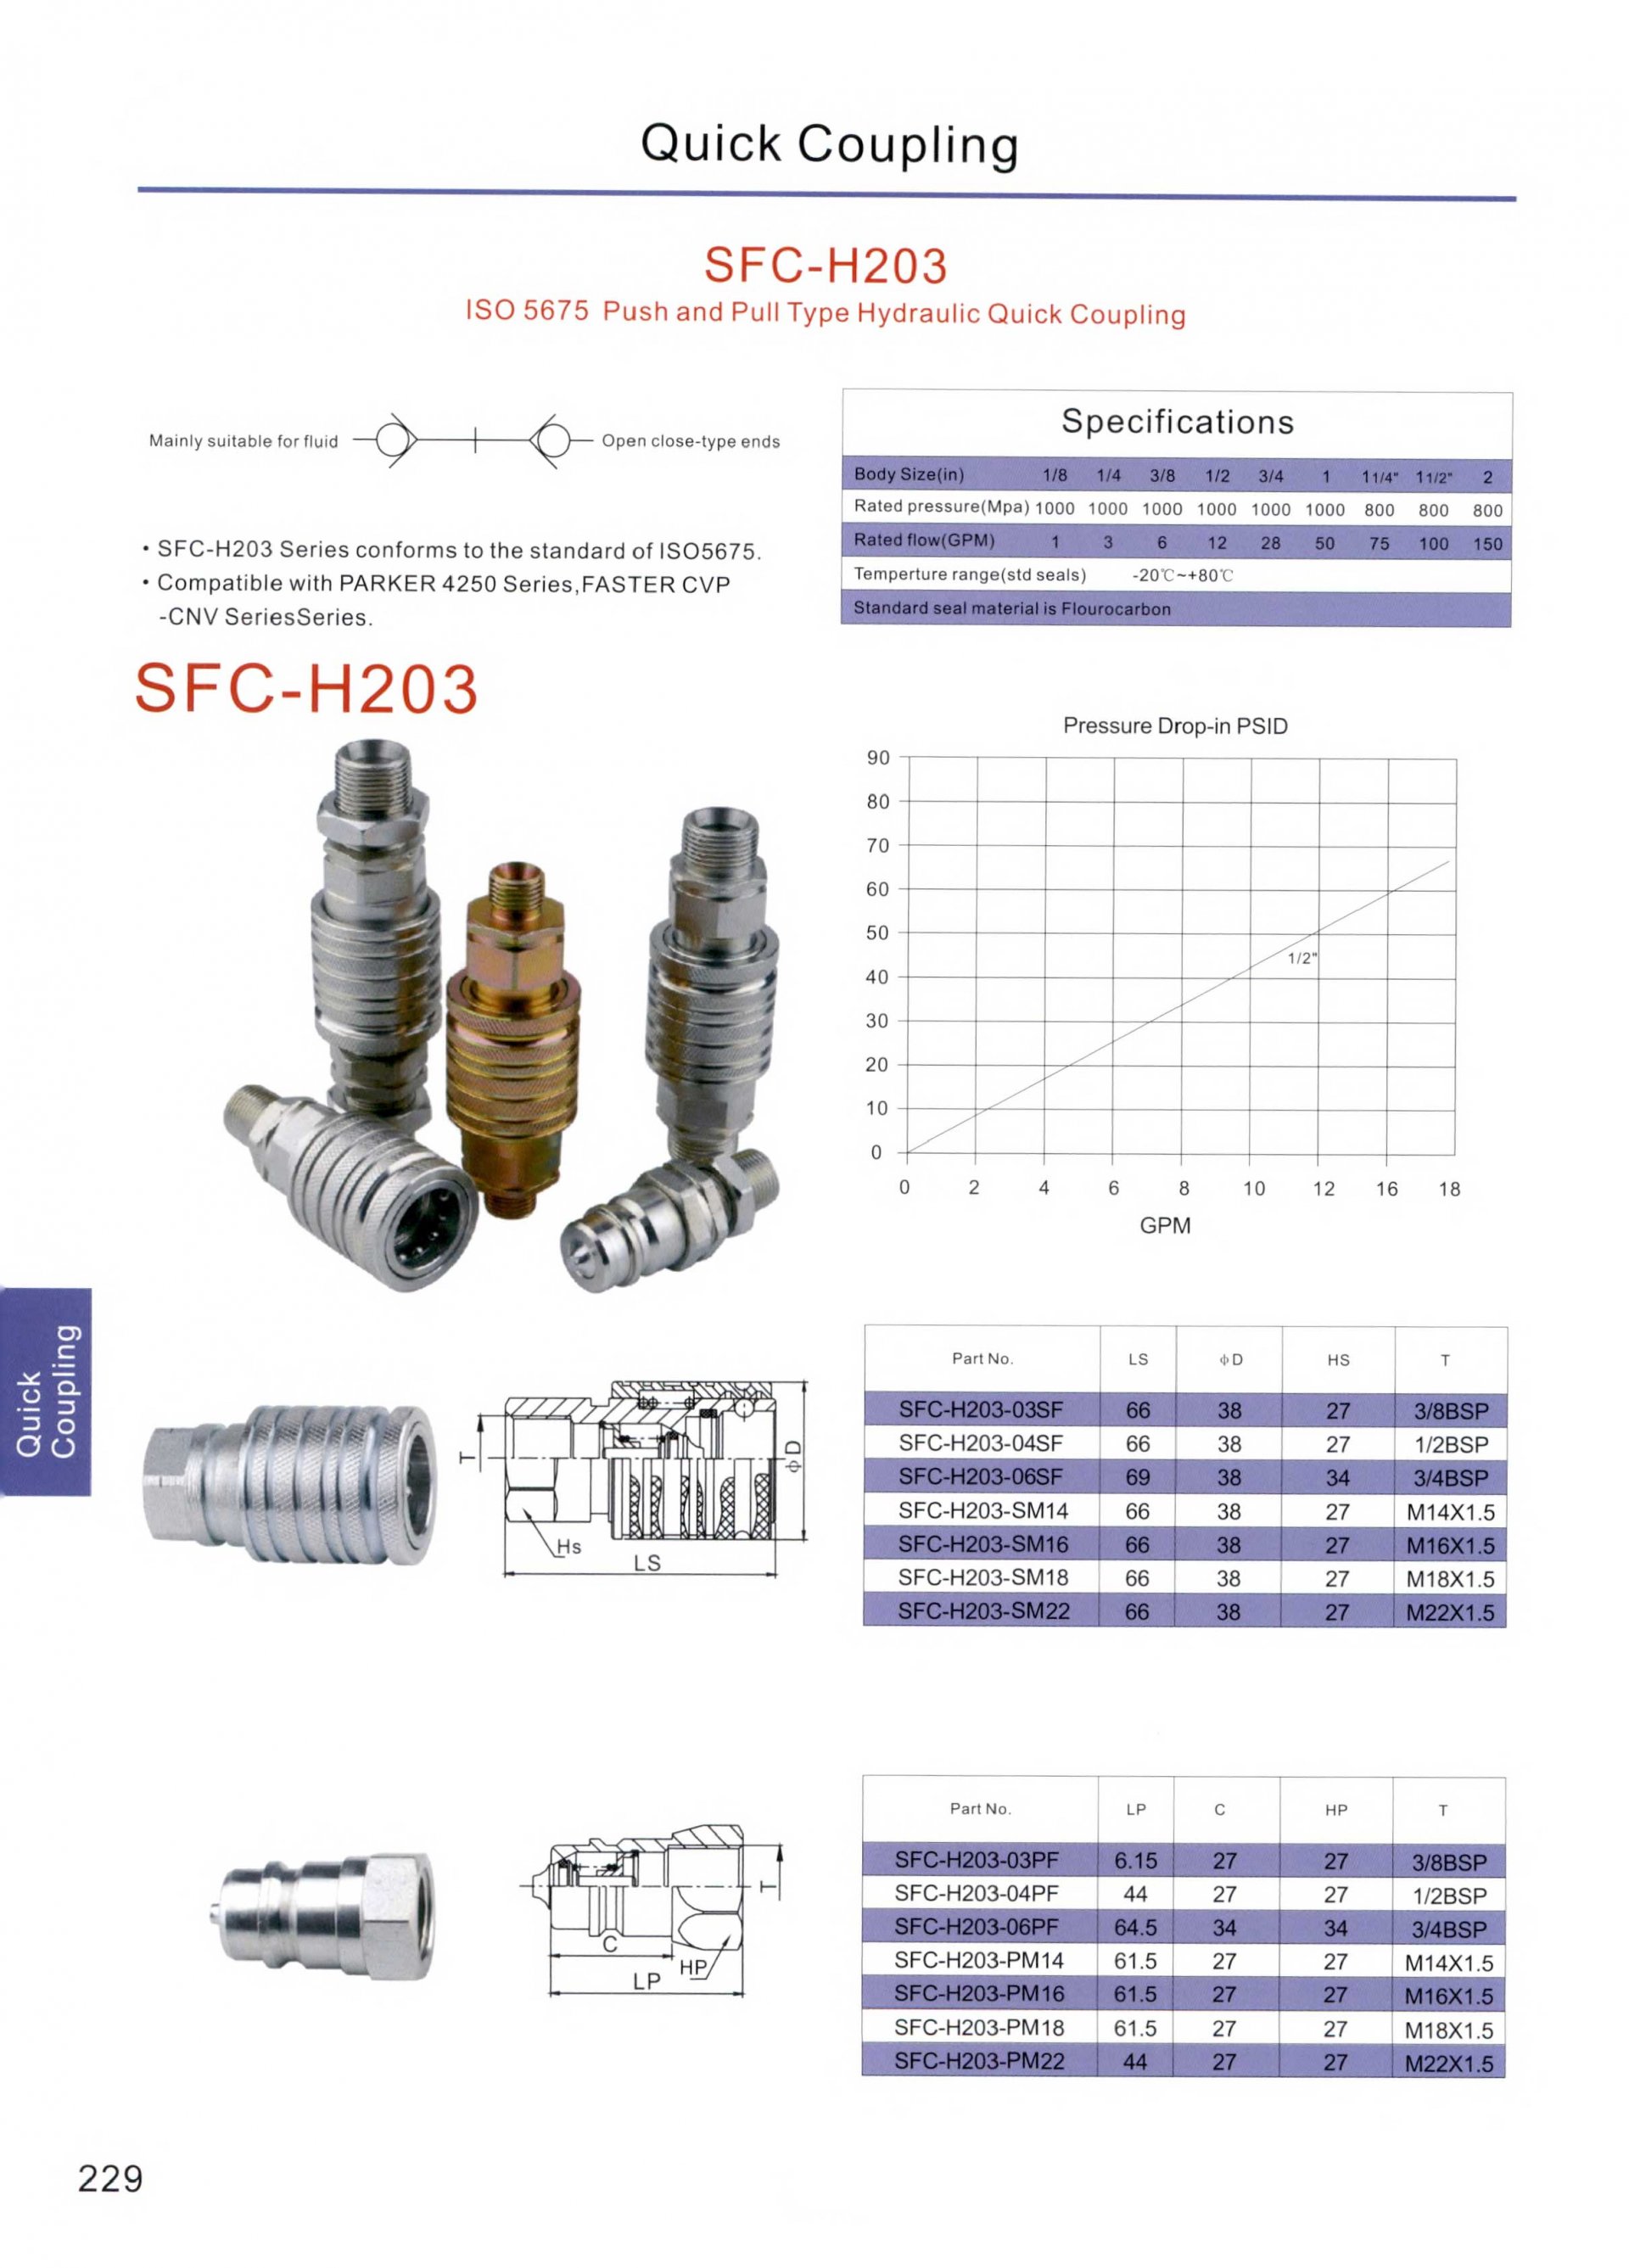 SFC-H203 ISO 5675 PULL and PULLType Hydraulic Quick Coupling